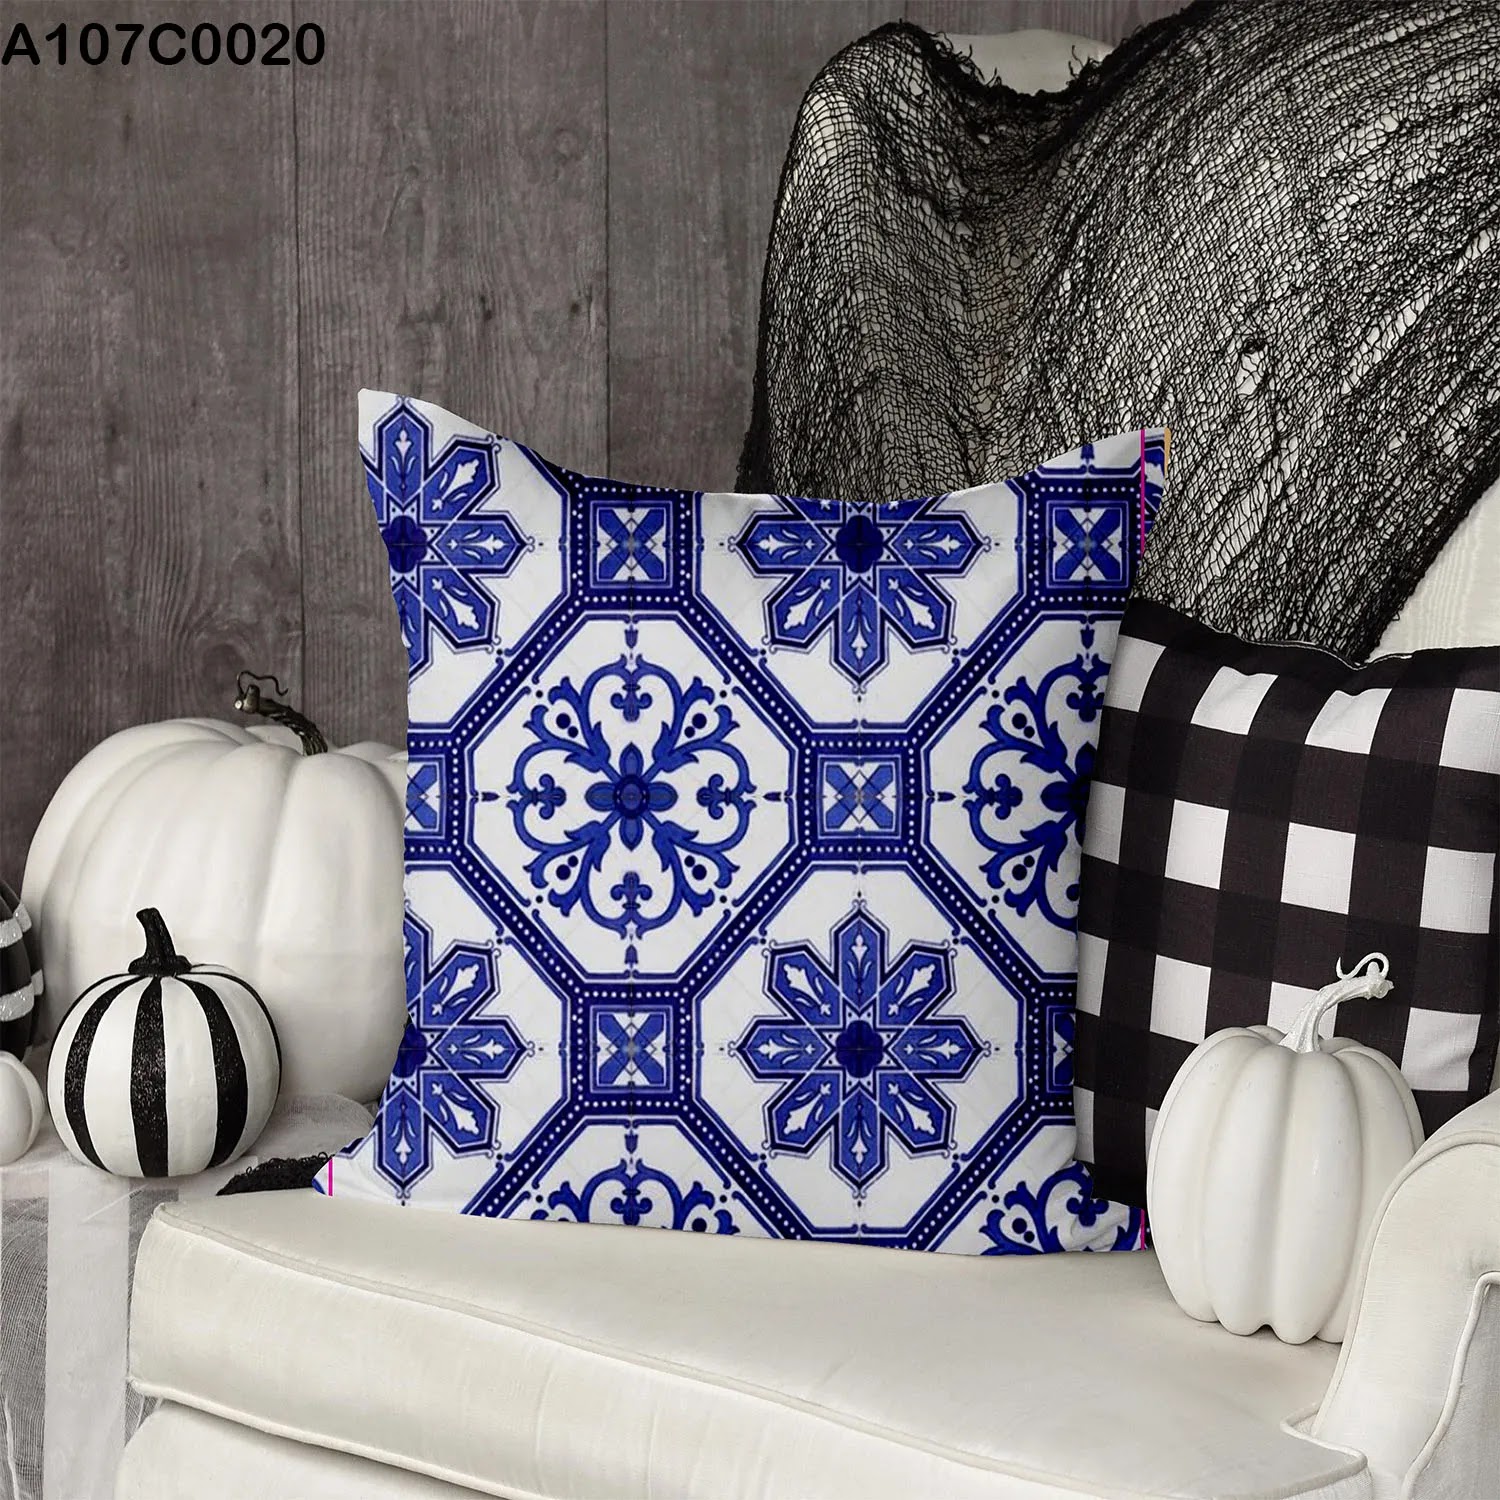 White pillow case with blue Engravings